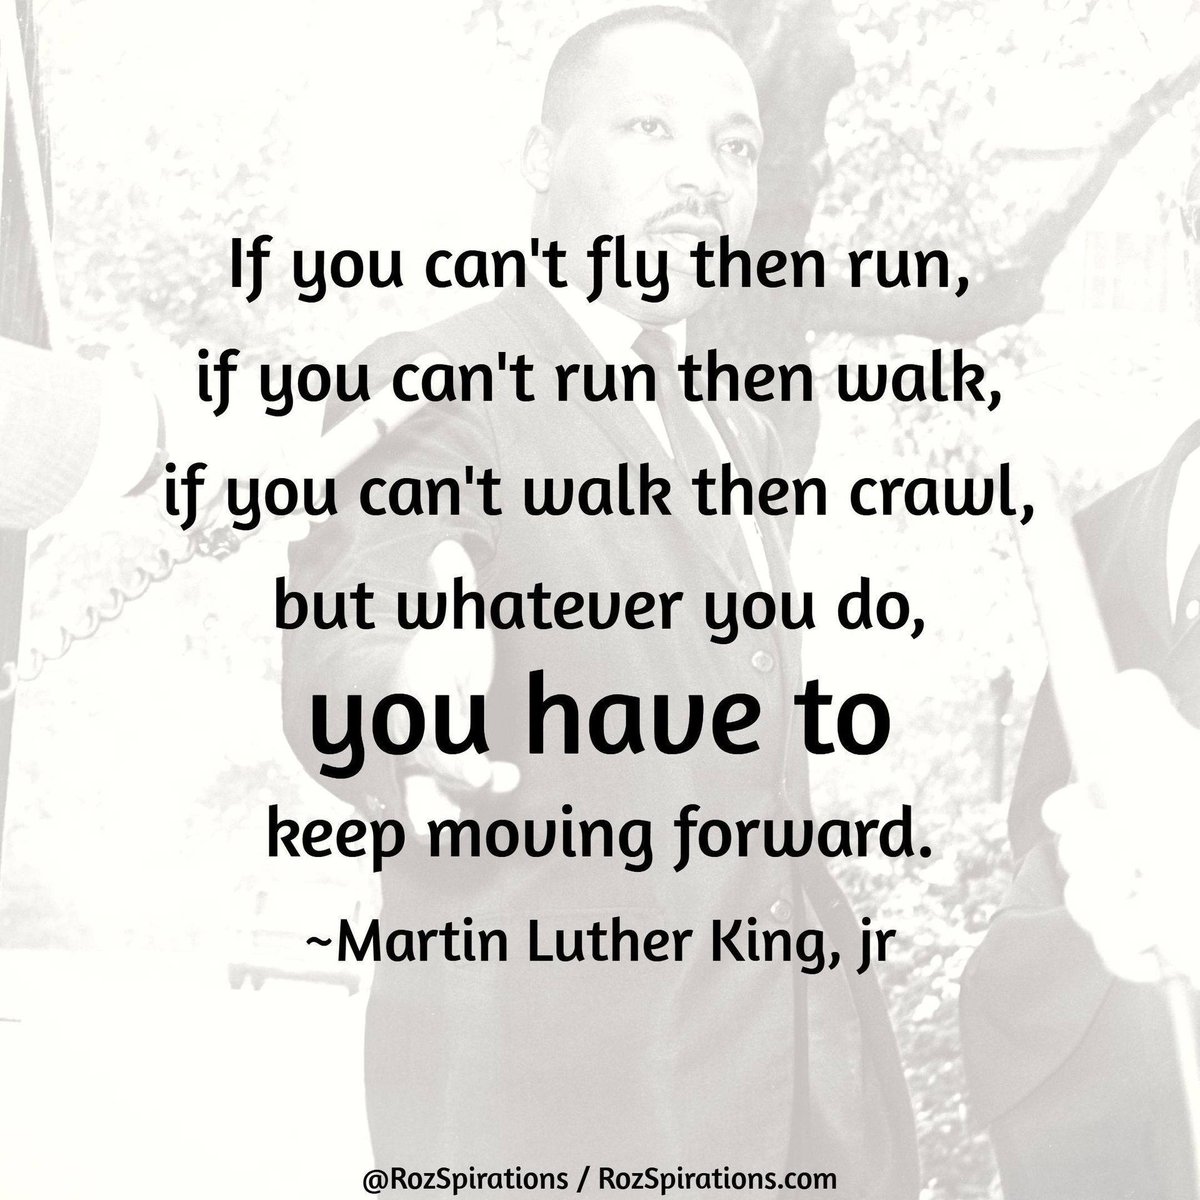 If you can't fly then run, if you can't run then walk, if you can't walk then crawl, but whatever you do, YOU HAVE TO keep moving forward! ~Martin Luther King, jr. #RozSpirations #InspirationalInfluencer #LoveTrain #JoyTrain #SuccessTrain #qotd #quote #quotes